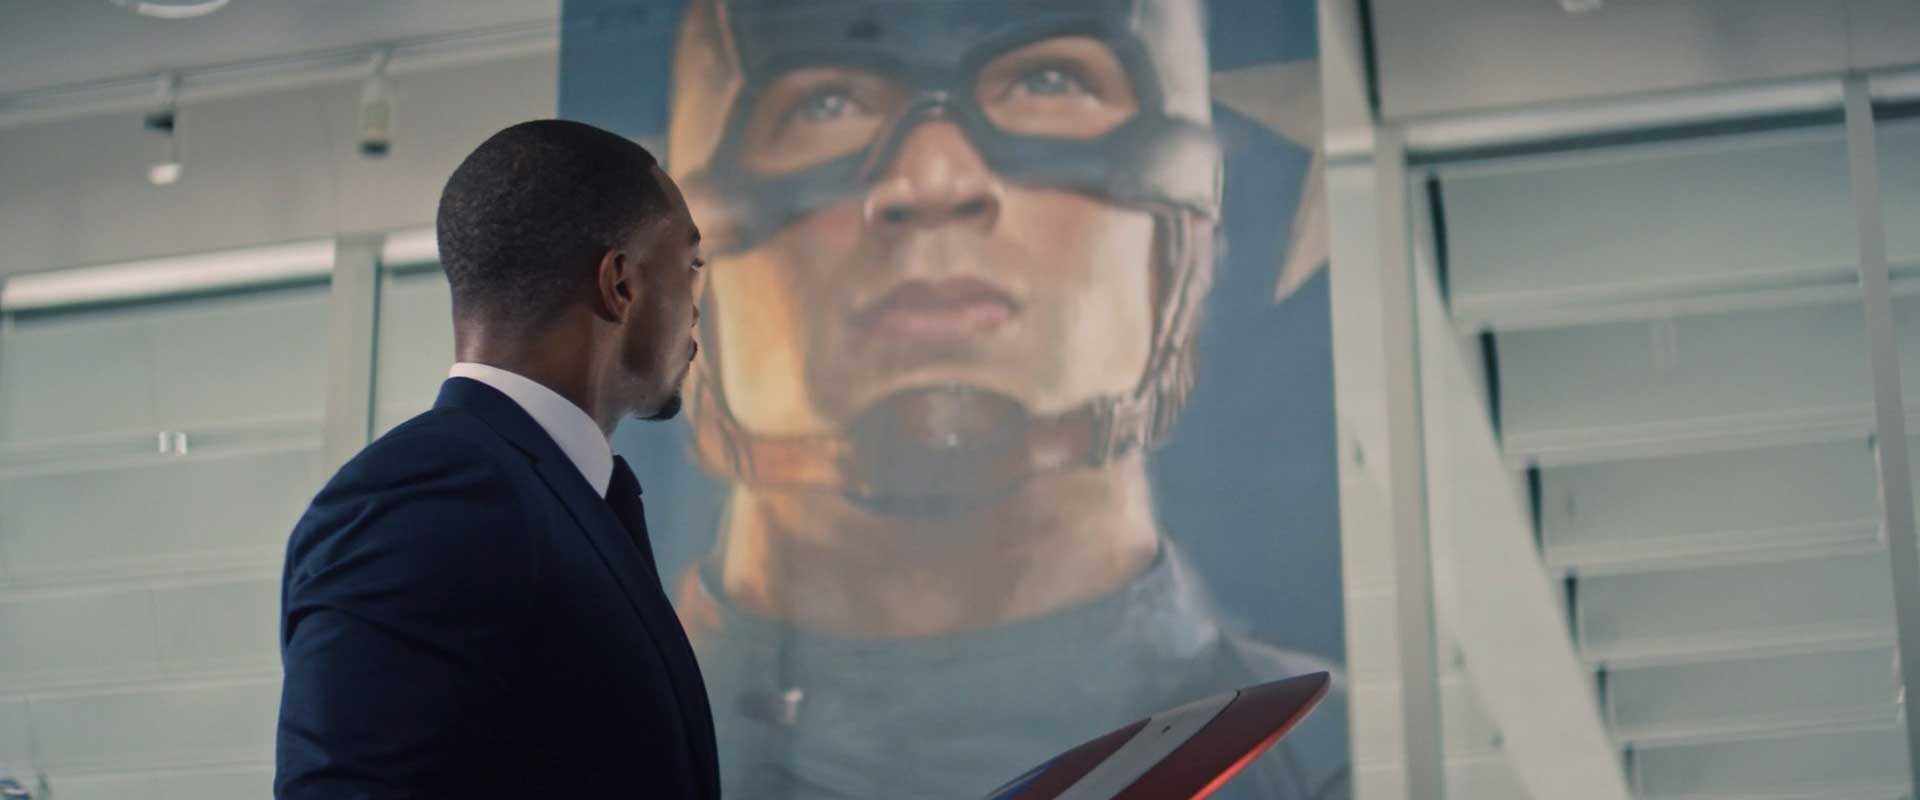 The Falcon and the Winter Soldier Episode 1 Still 1